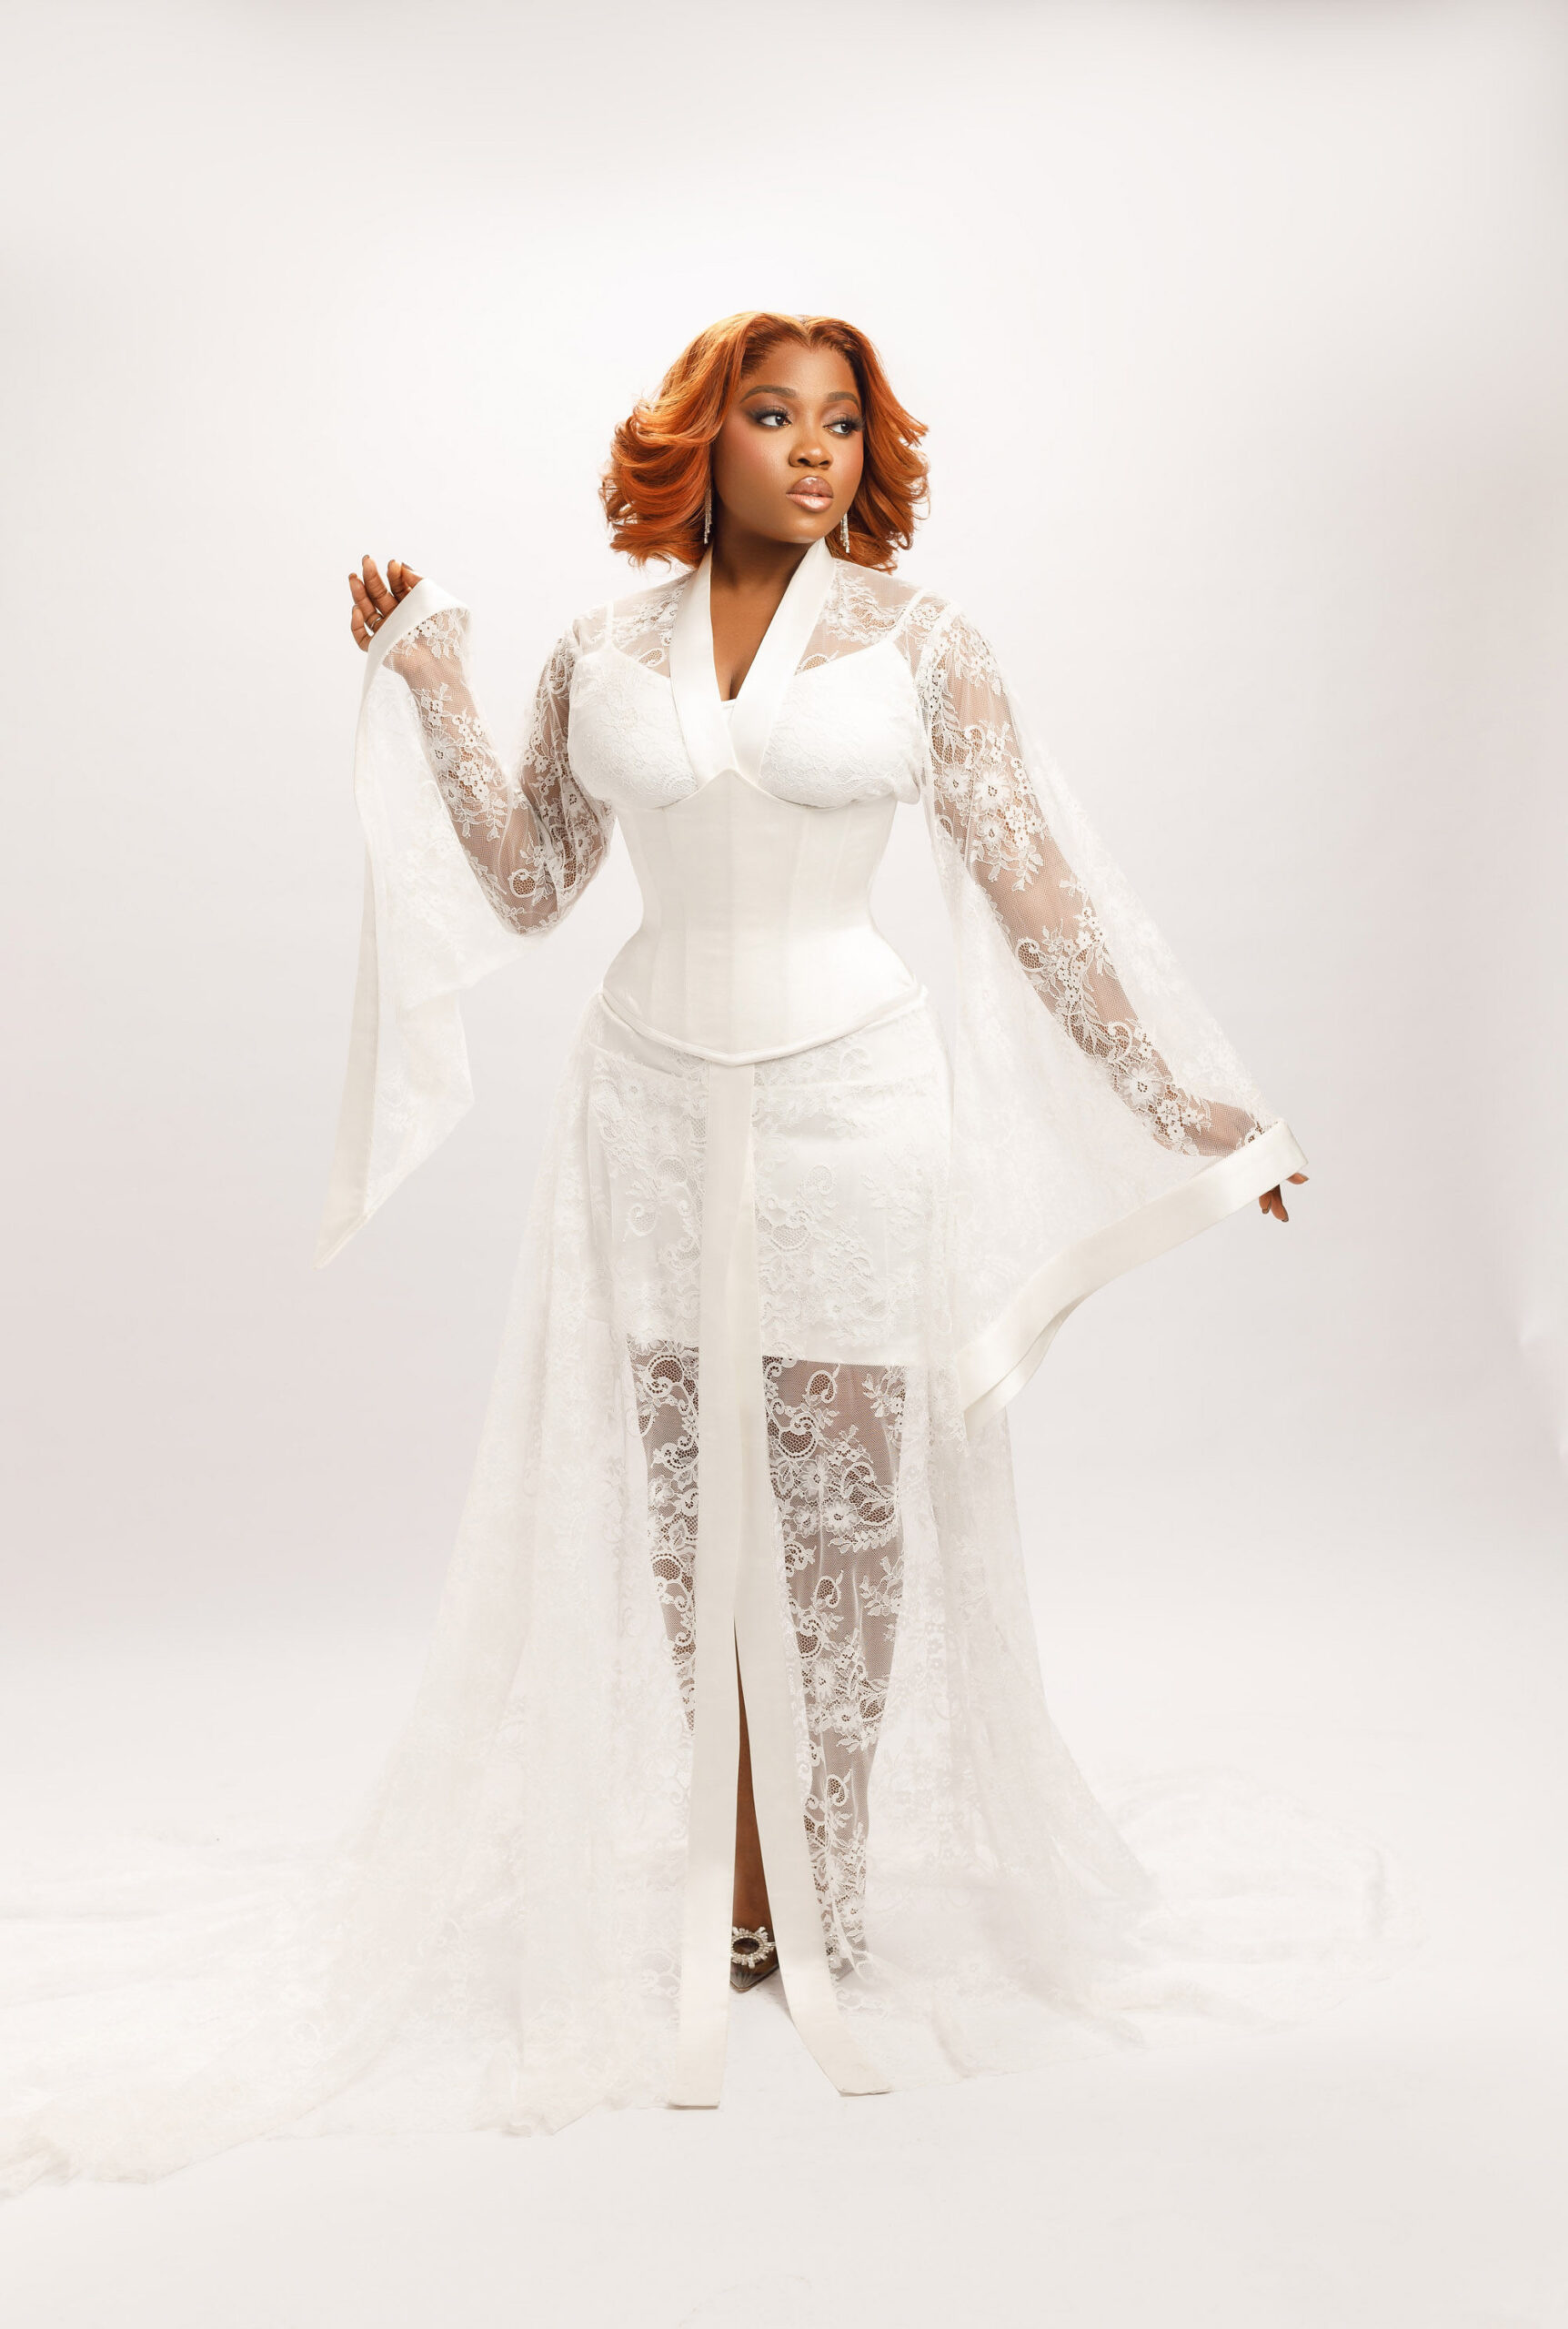 Your Wedding Morning Just Got Better With This Bridal Robe Collection by Veekee James & Hair by Adefunke